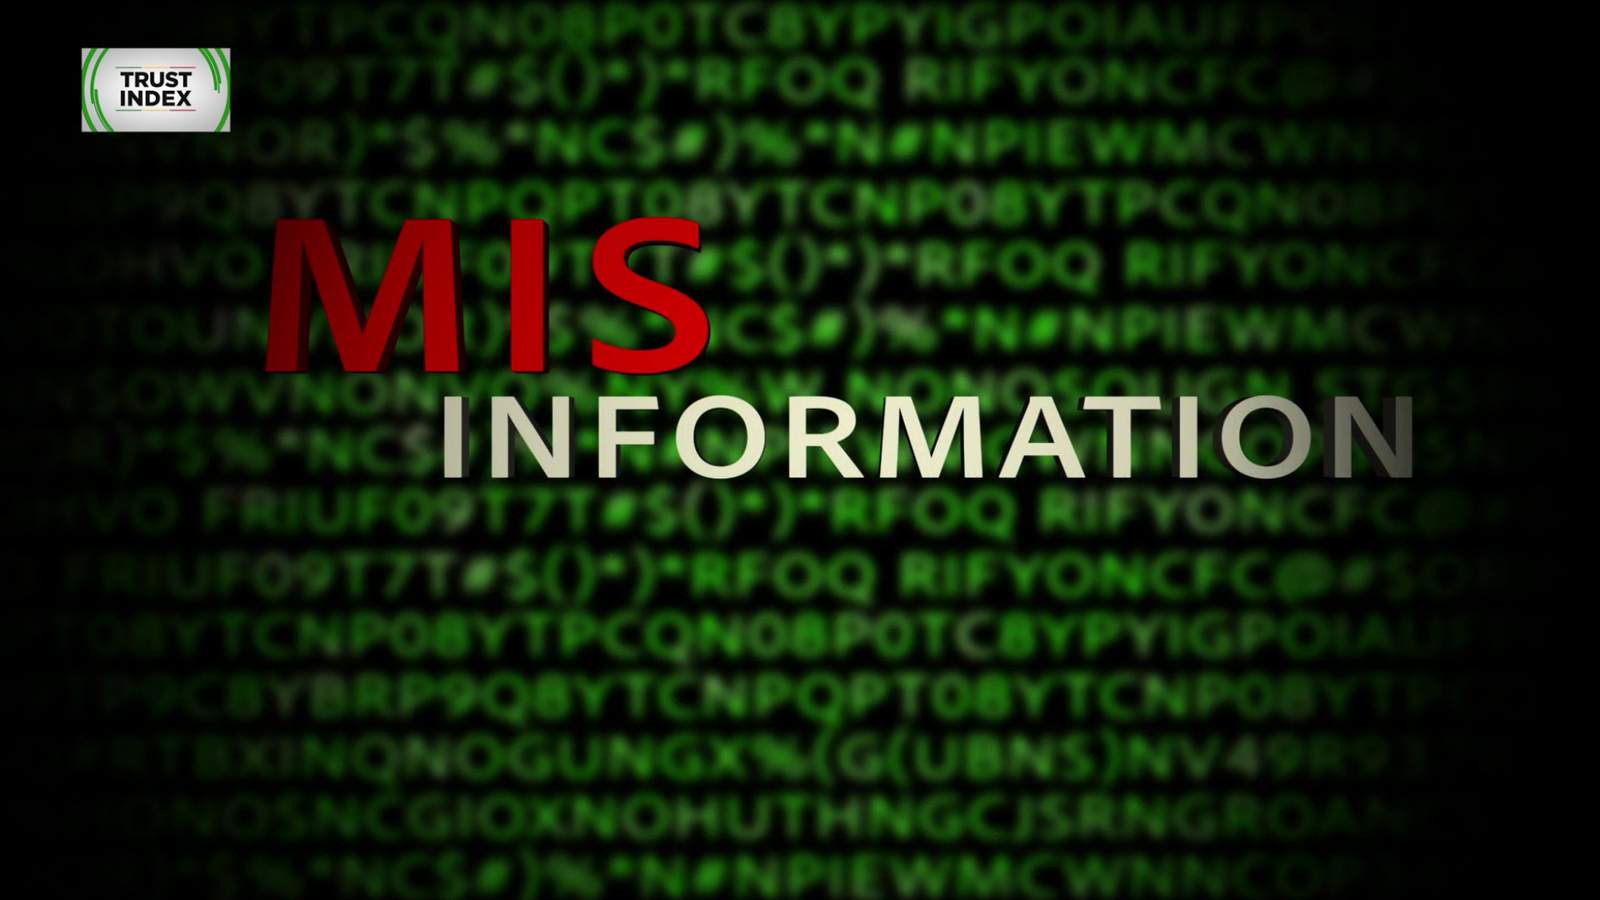 What questions do you have about misinformation this election season?